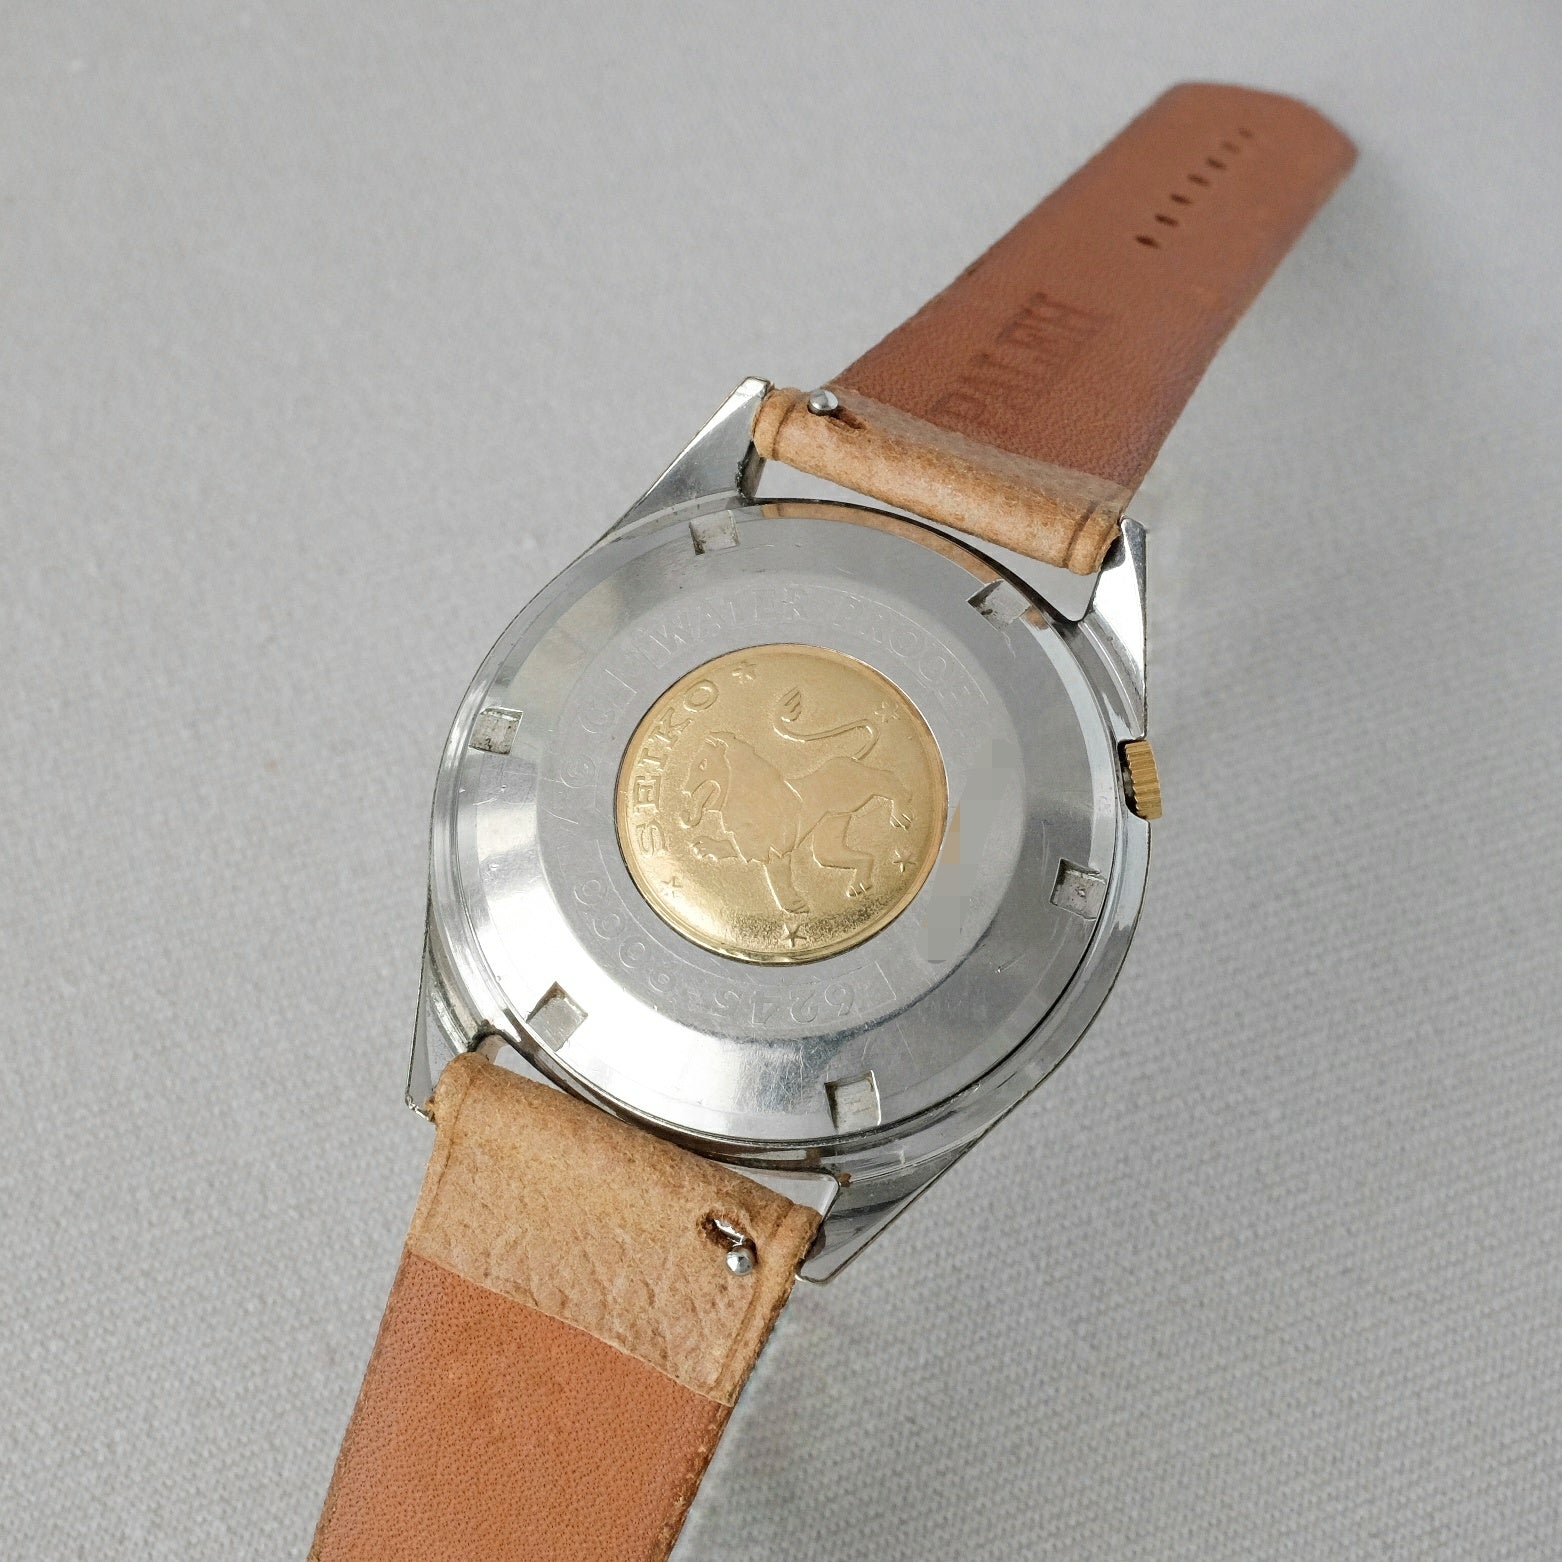 Grand Seiko 6245-9000 from 1966 (Gold Cap & NOS Crystal)